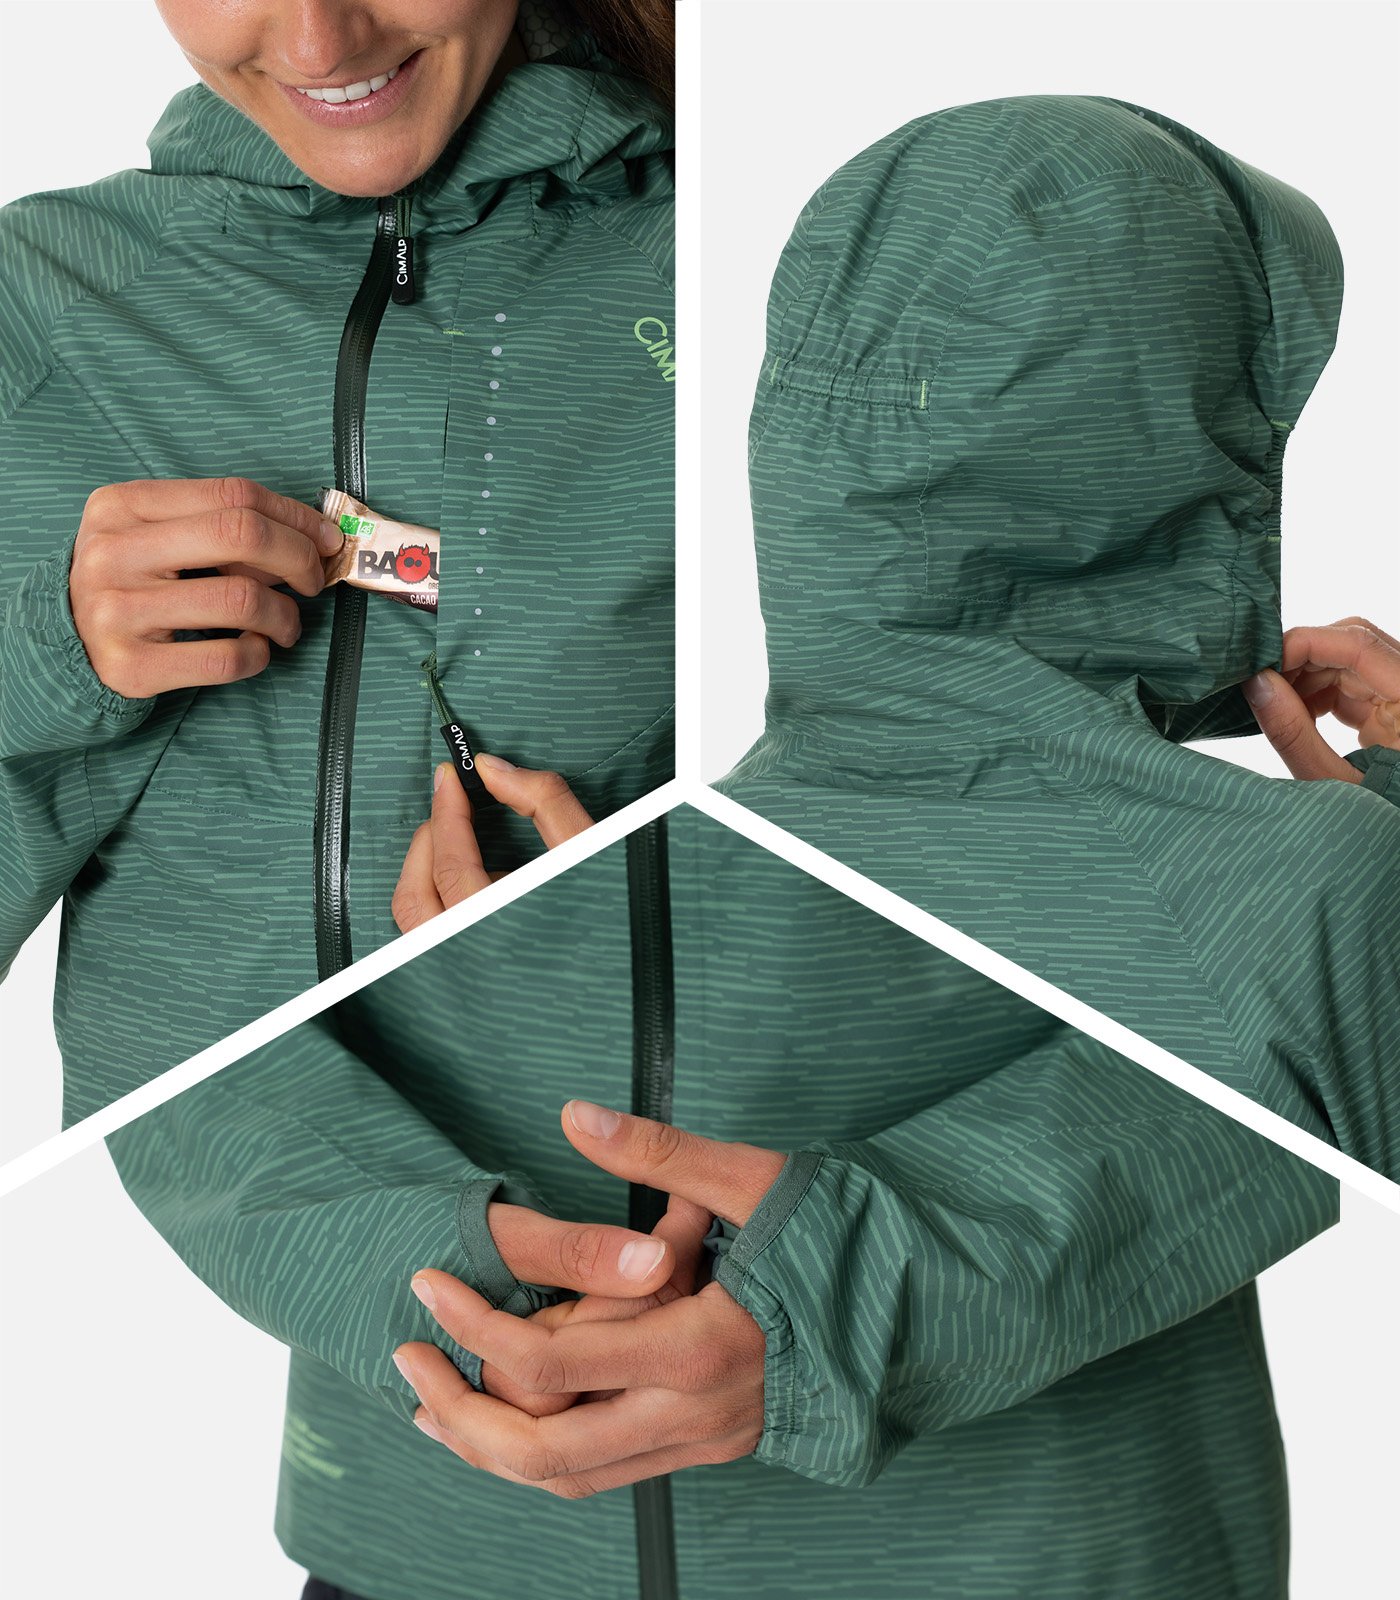 Chaqueta de trail running impermeable y transpirable